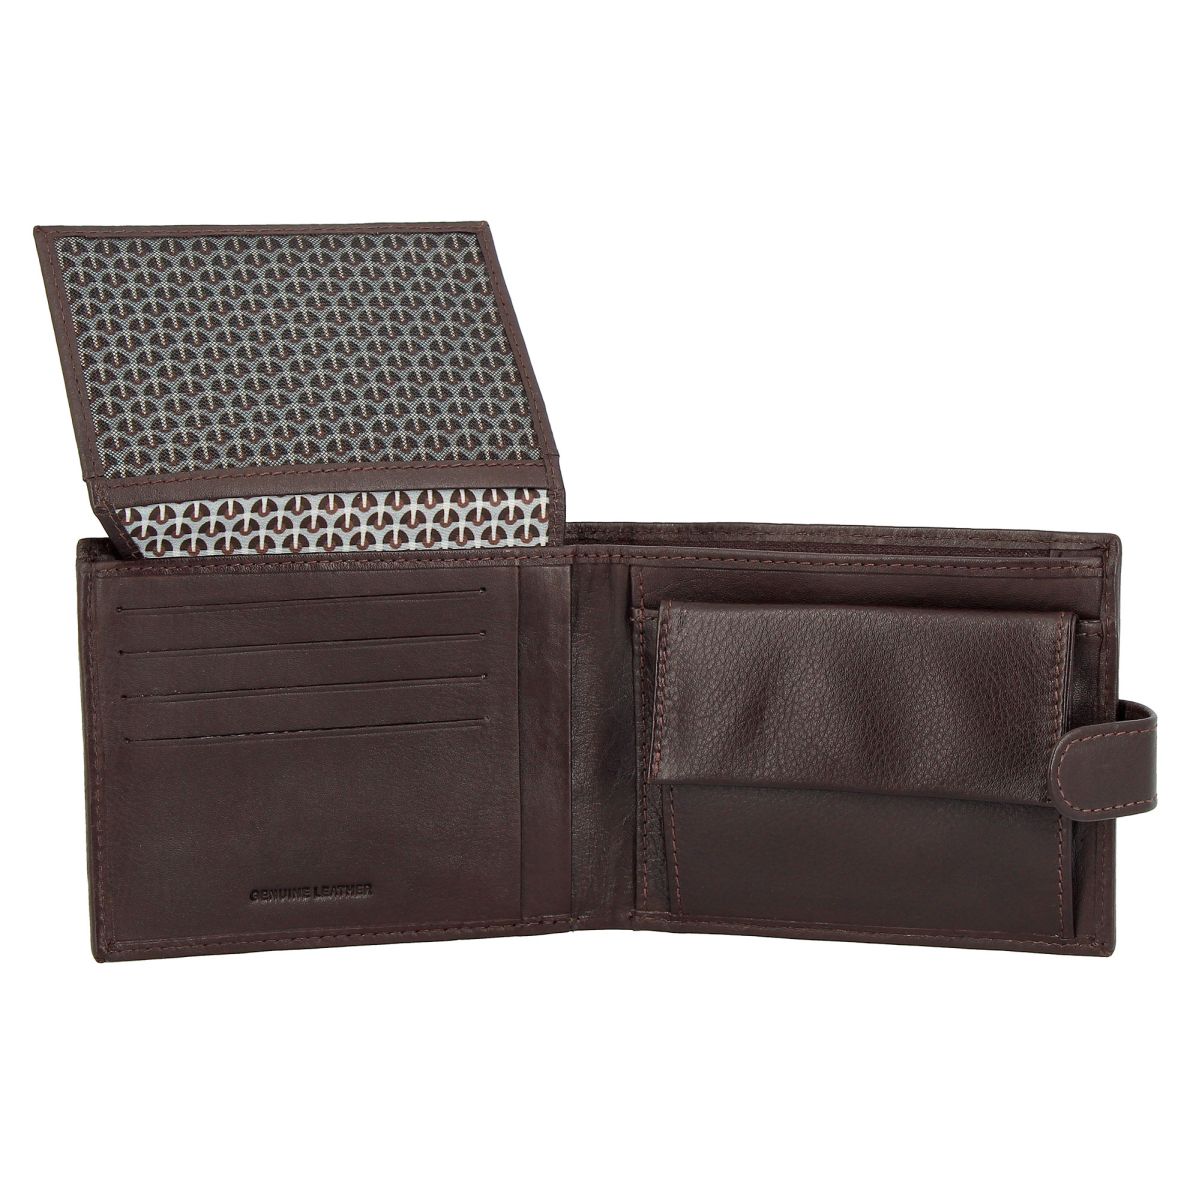 NUVOLA PELLE Mens Leather Wallet With Snap Button - Dark Brown